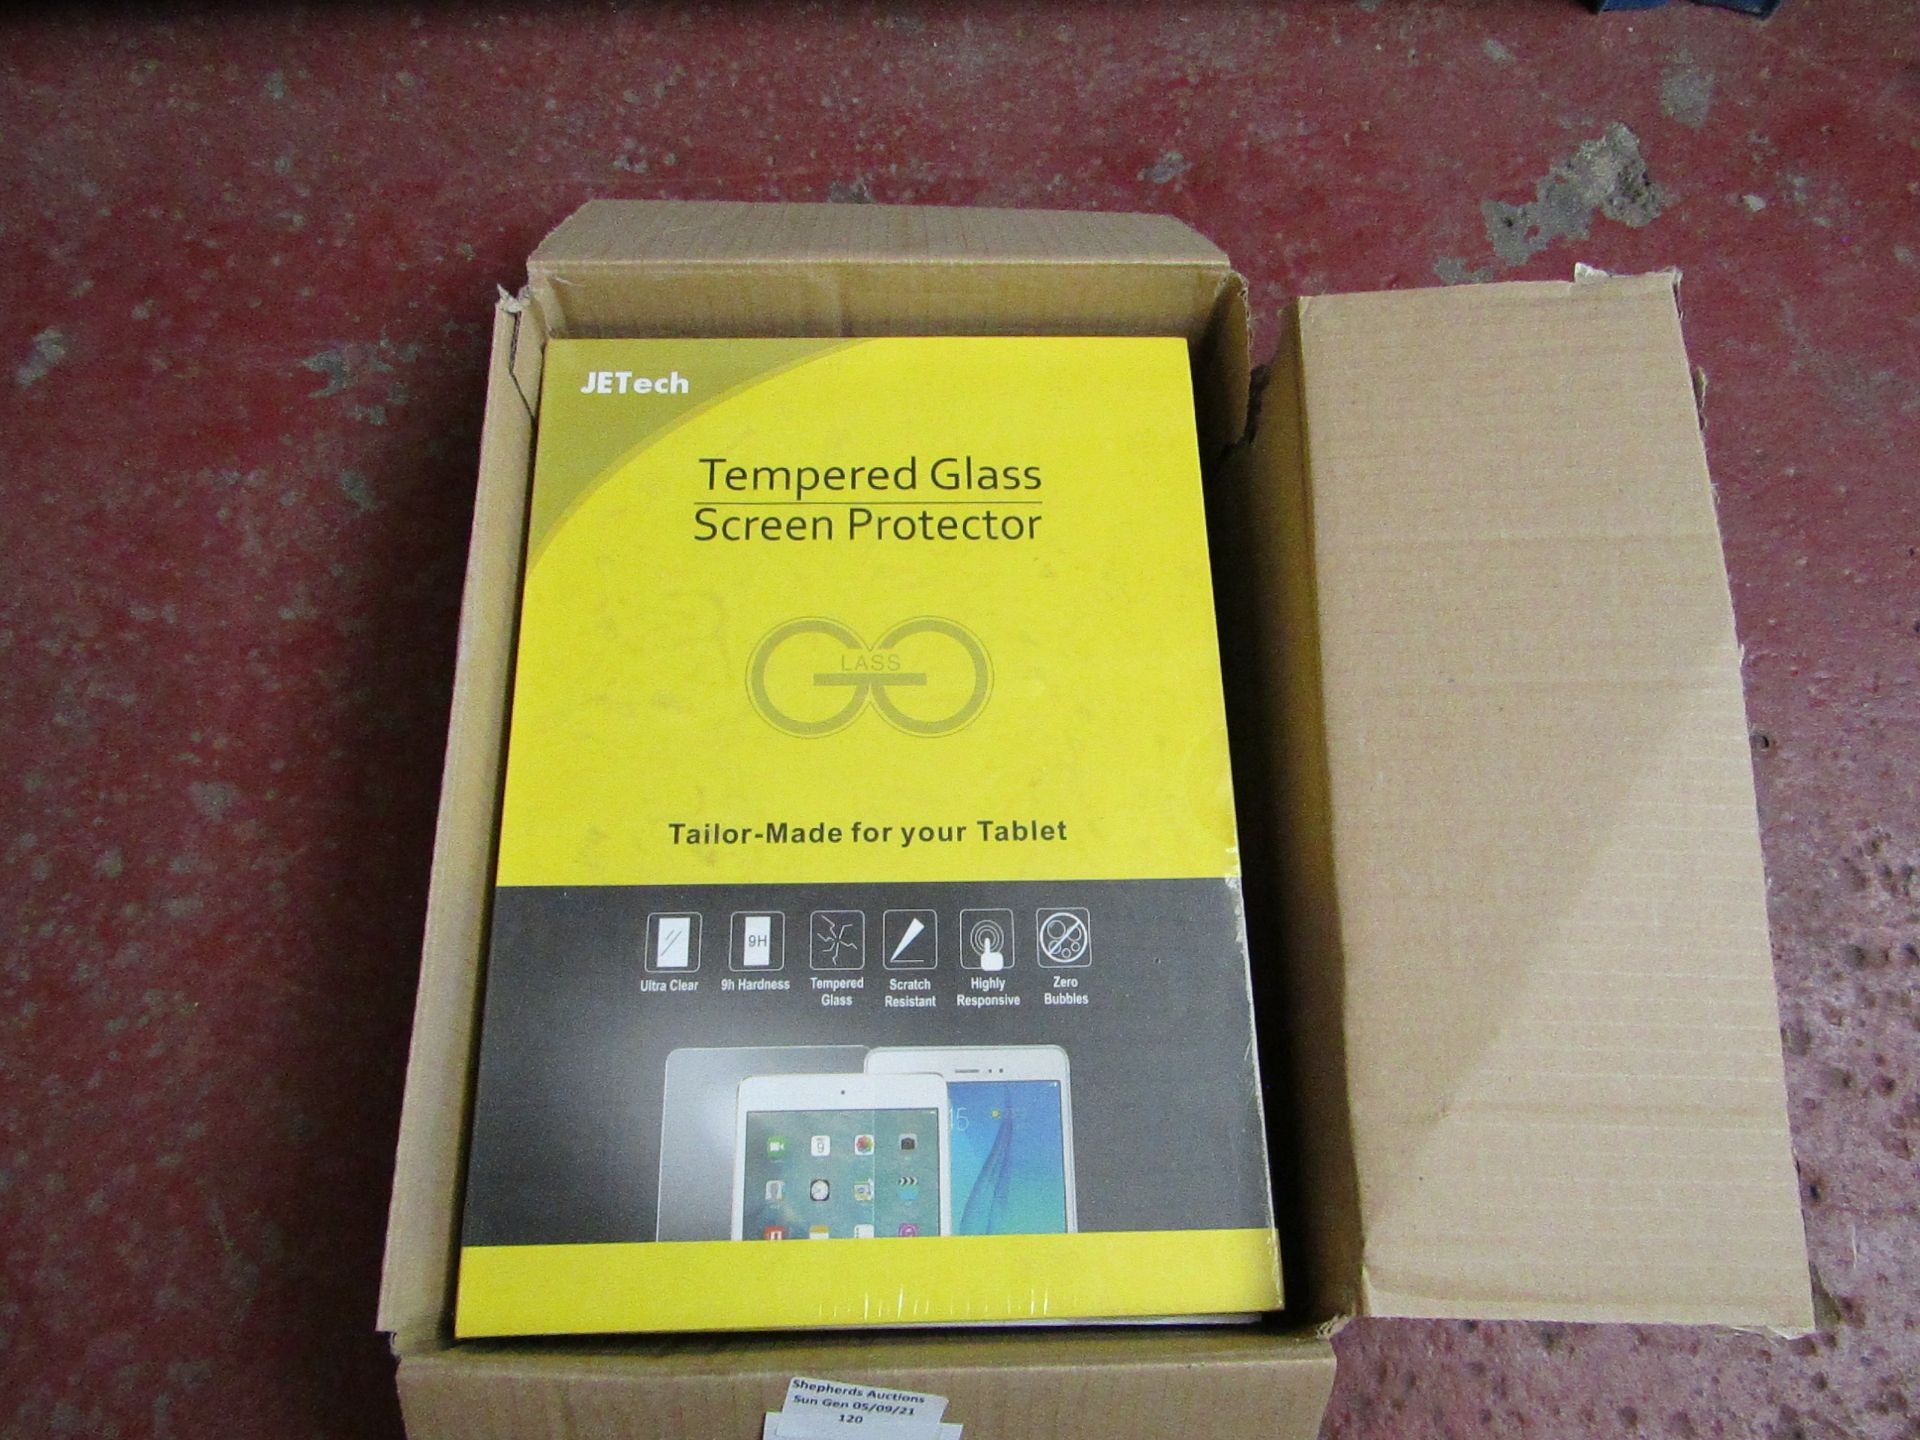 2x Jtech - Tempered Glass Screen Protector - Tailor Made for Your Tablet - New & Packaged.